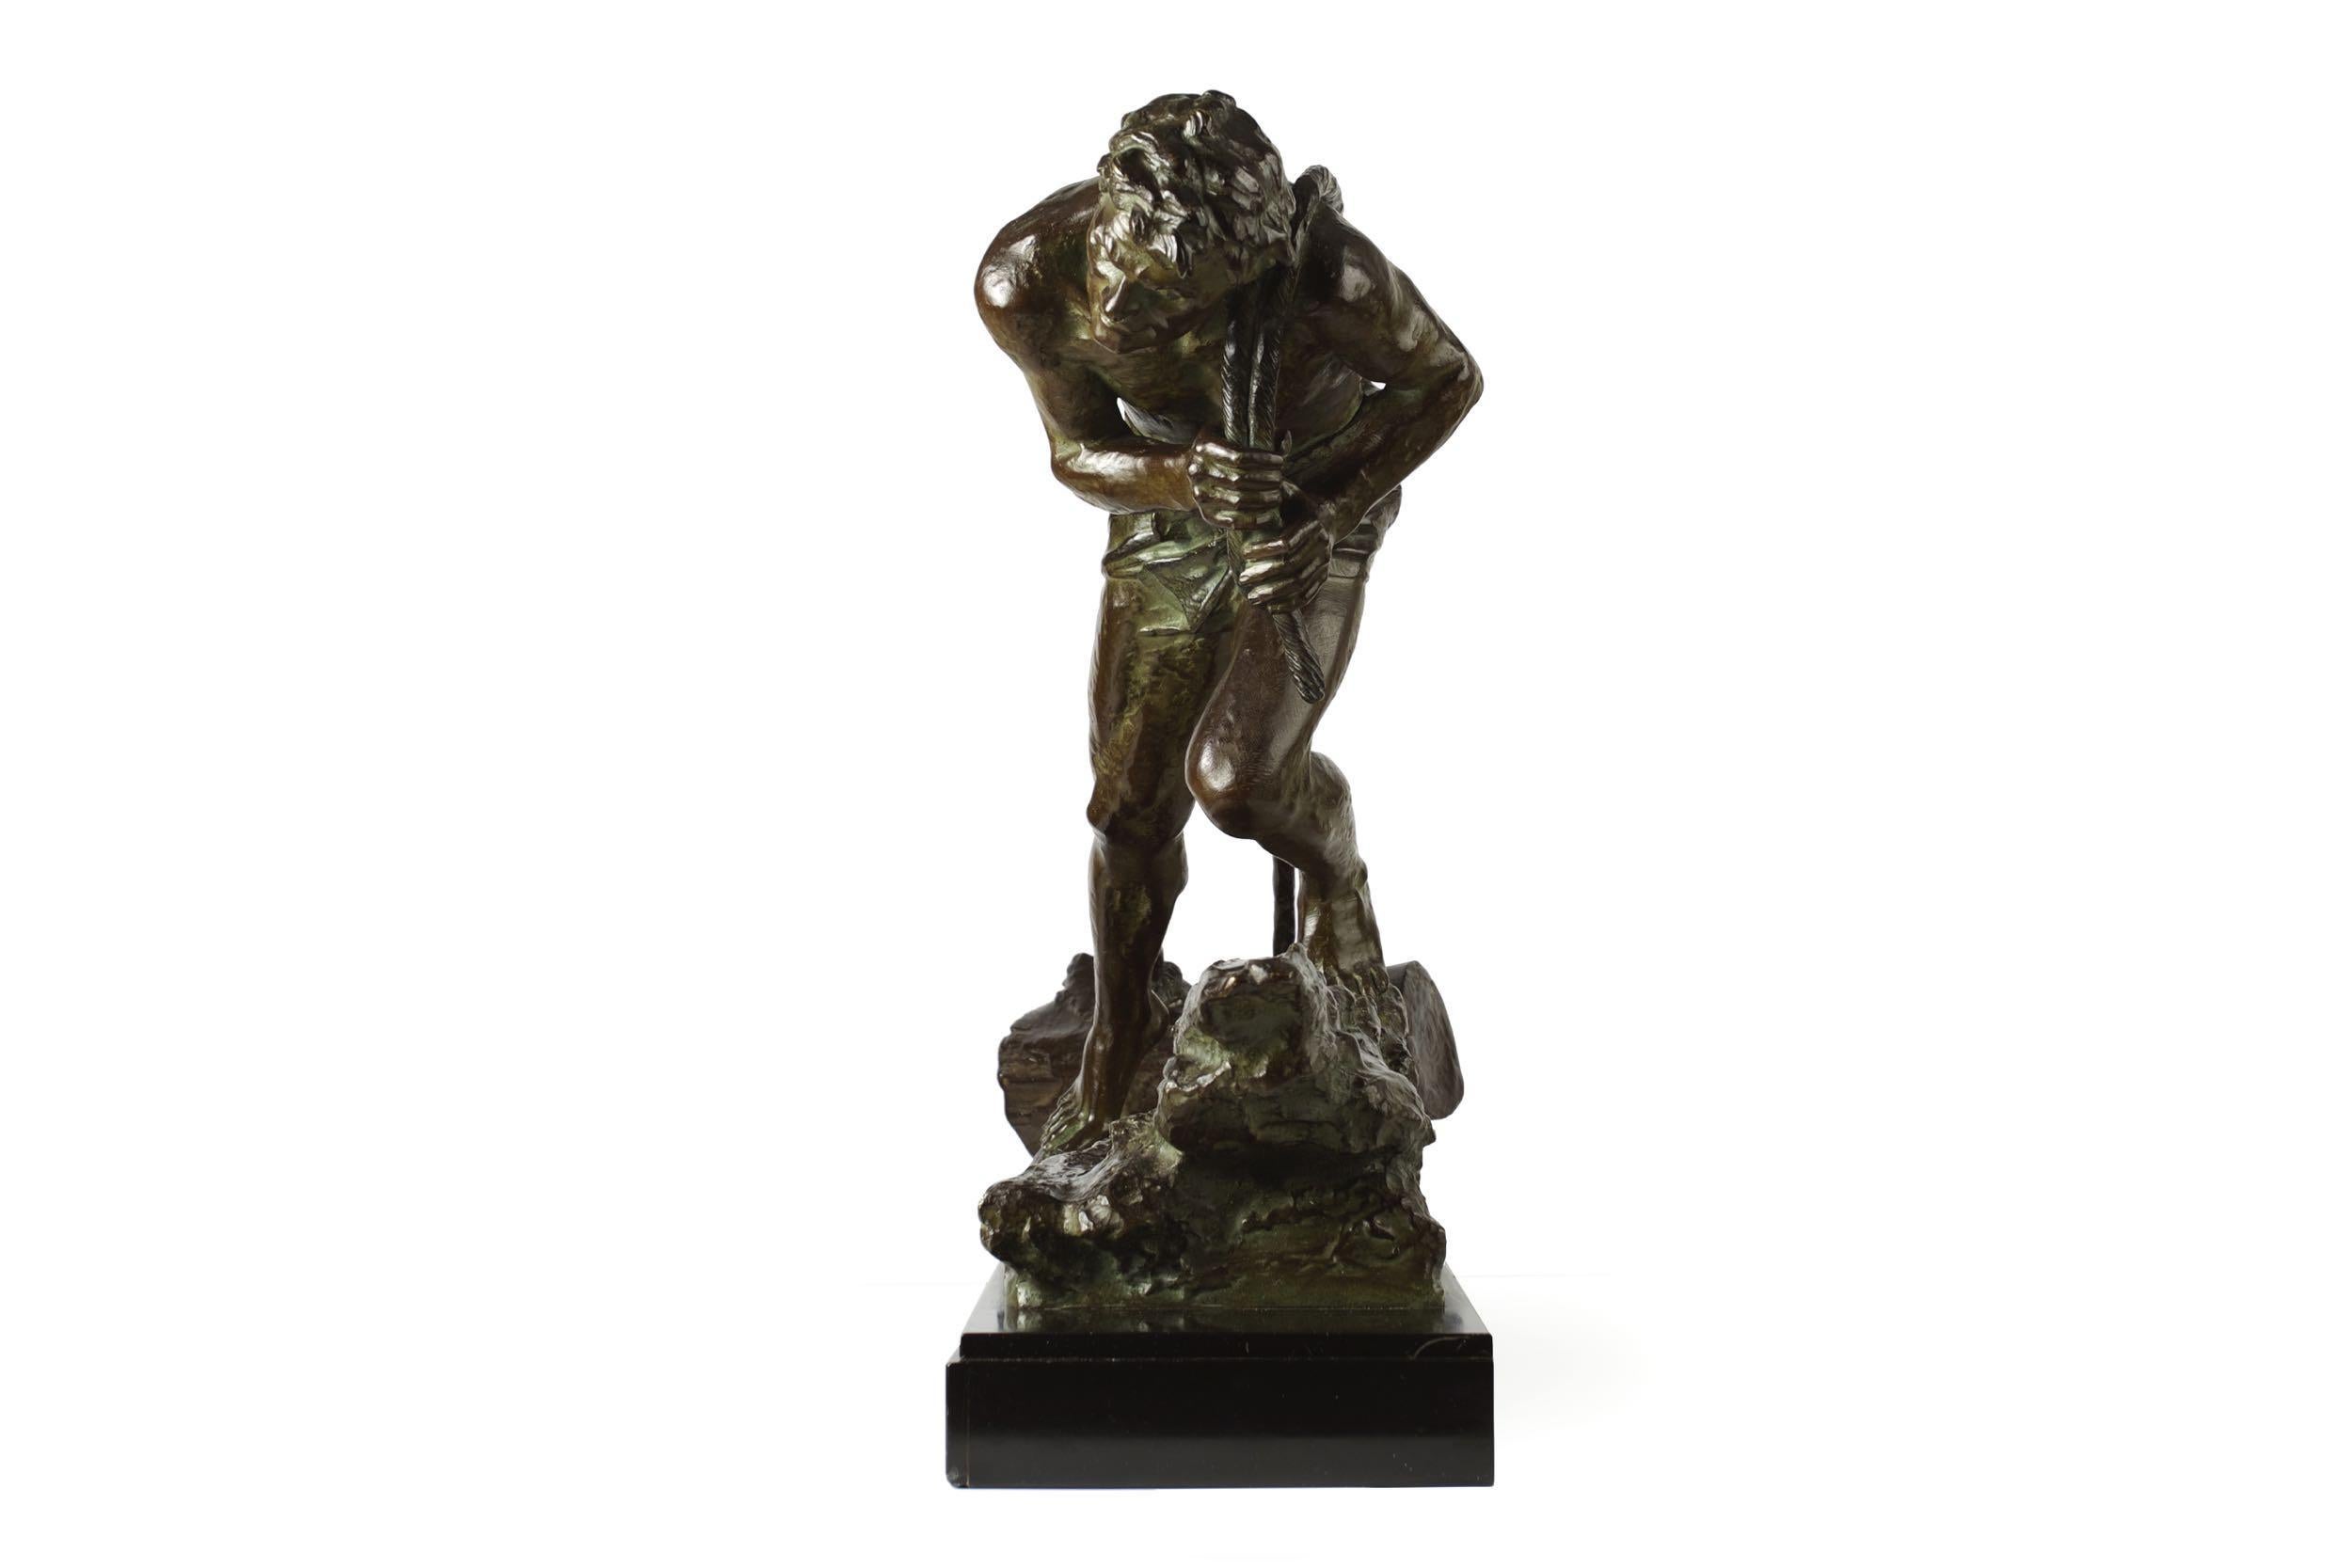 Early 20th Century French Antique Art Deco Bronze Sculpture “L’Effort” by Edouard Drouot